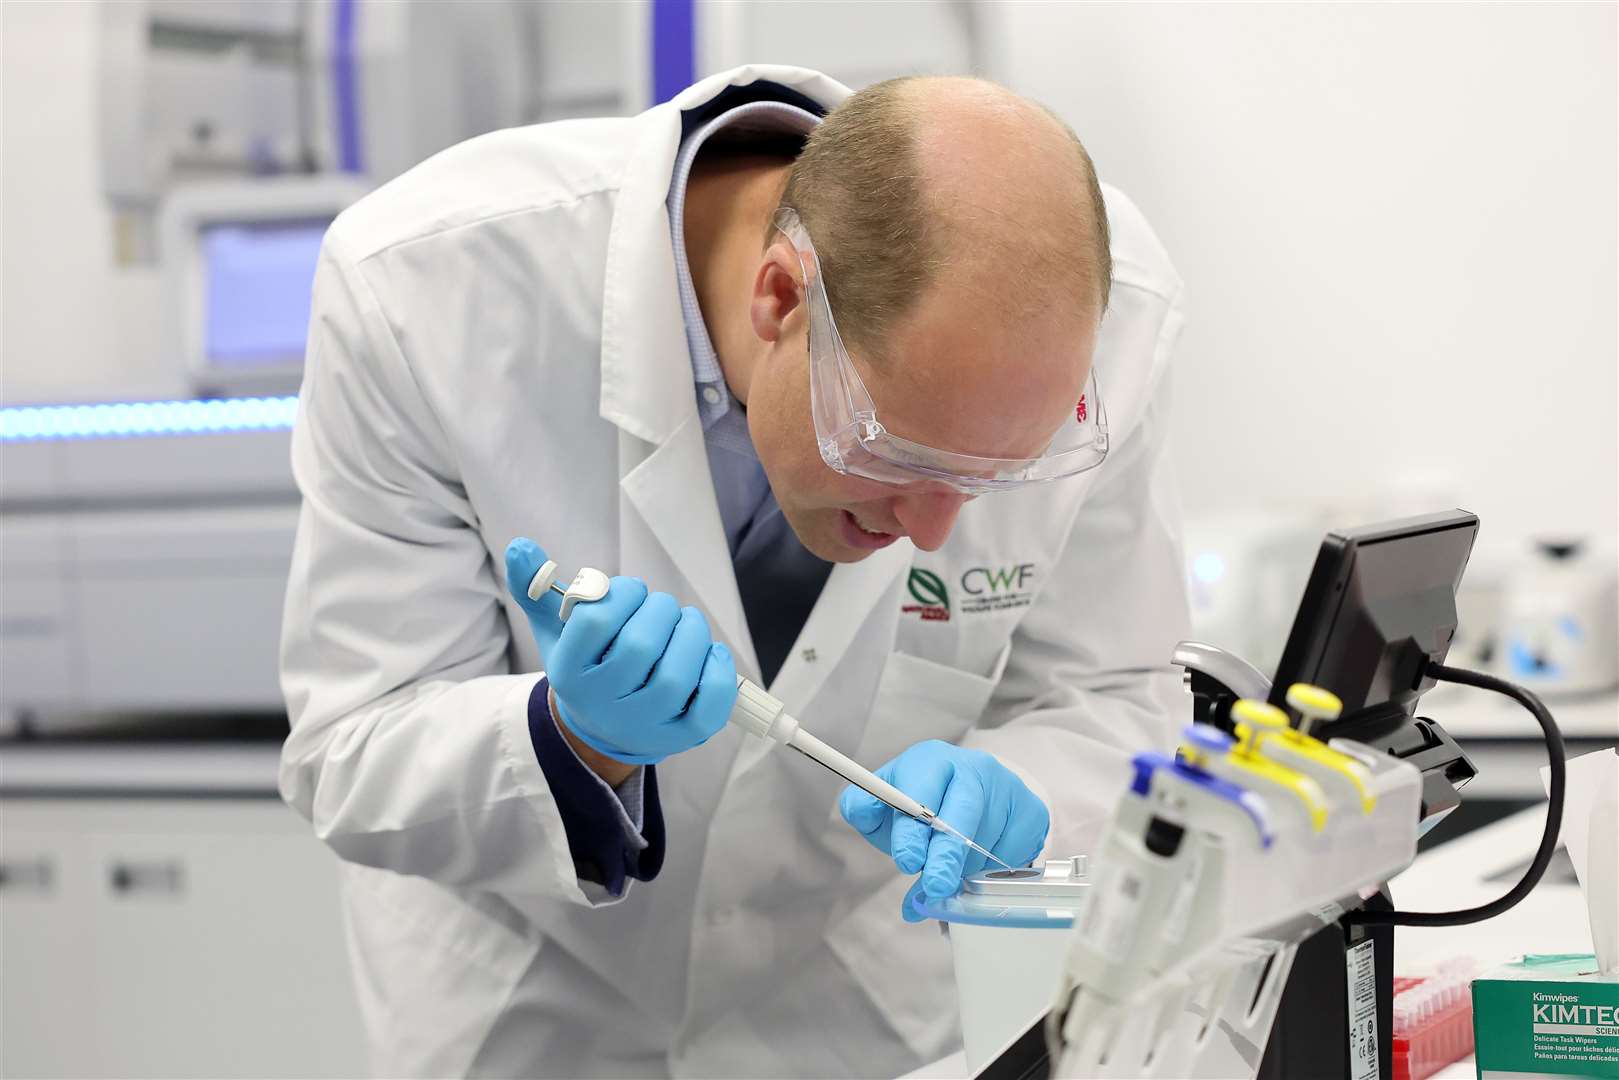 William uses forensic equipment as he performs DNA sequencing tests (Chris Jackson/PA)